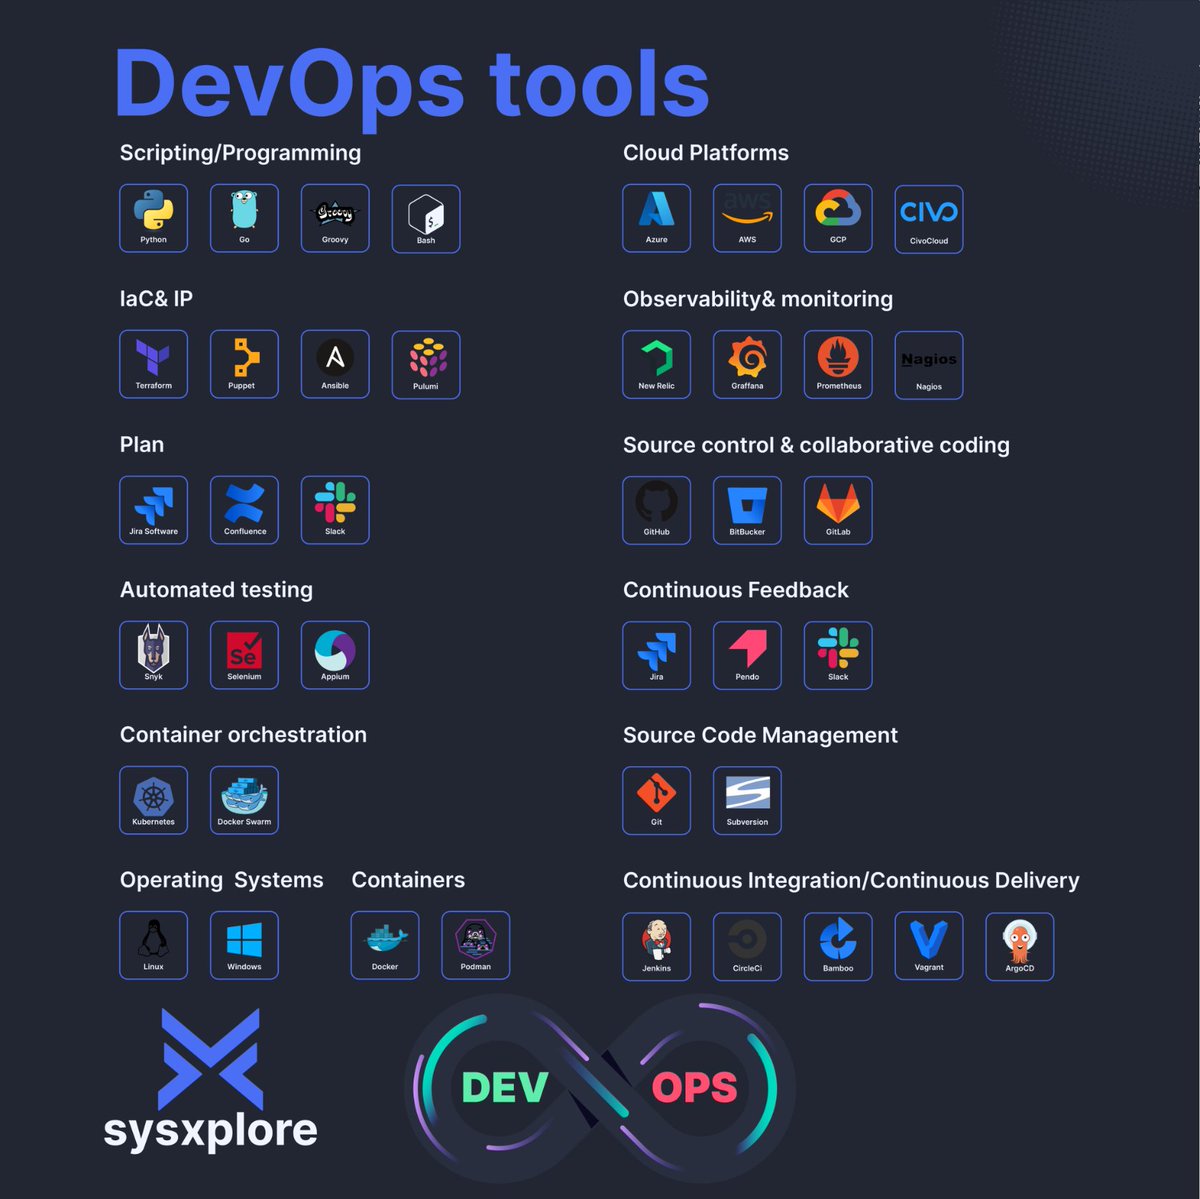 DevOps engineer toolkit🧰🎒

Operating system → Linux (recommended), Windows

Programming → Go, Python, Groovy, Bash

Container orchestration → Kubernetes, Docker Swarm

Containers → Docker, Podman, Containerd

Source Code Management → Git, Subversion

Cloud → AWS, GCP,